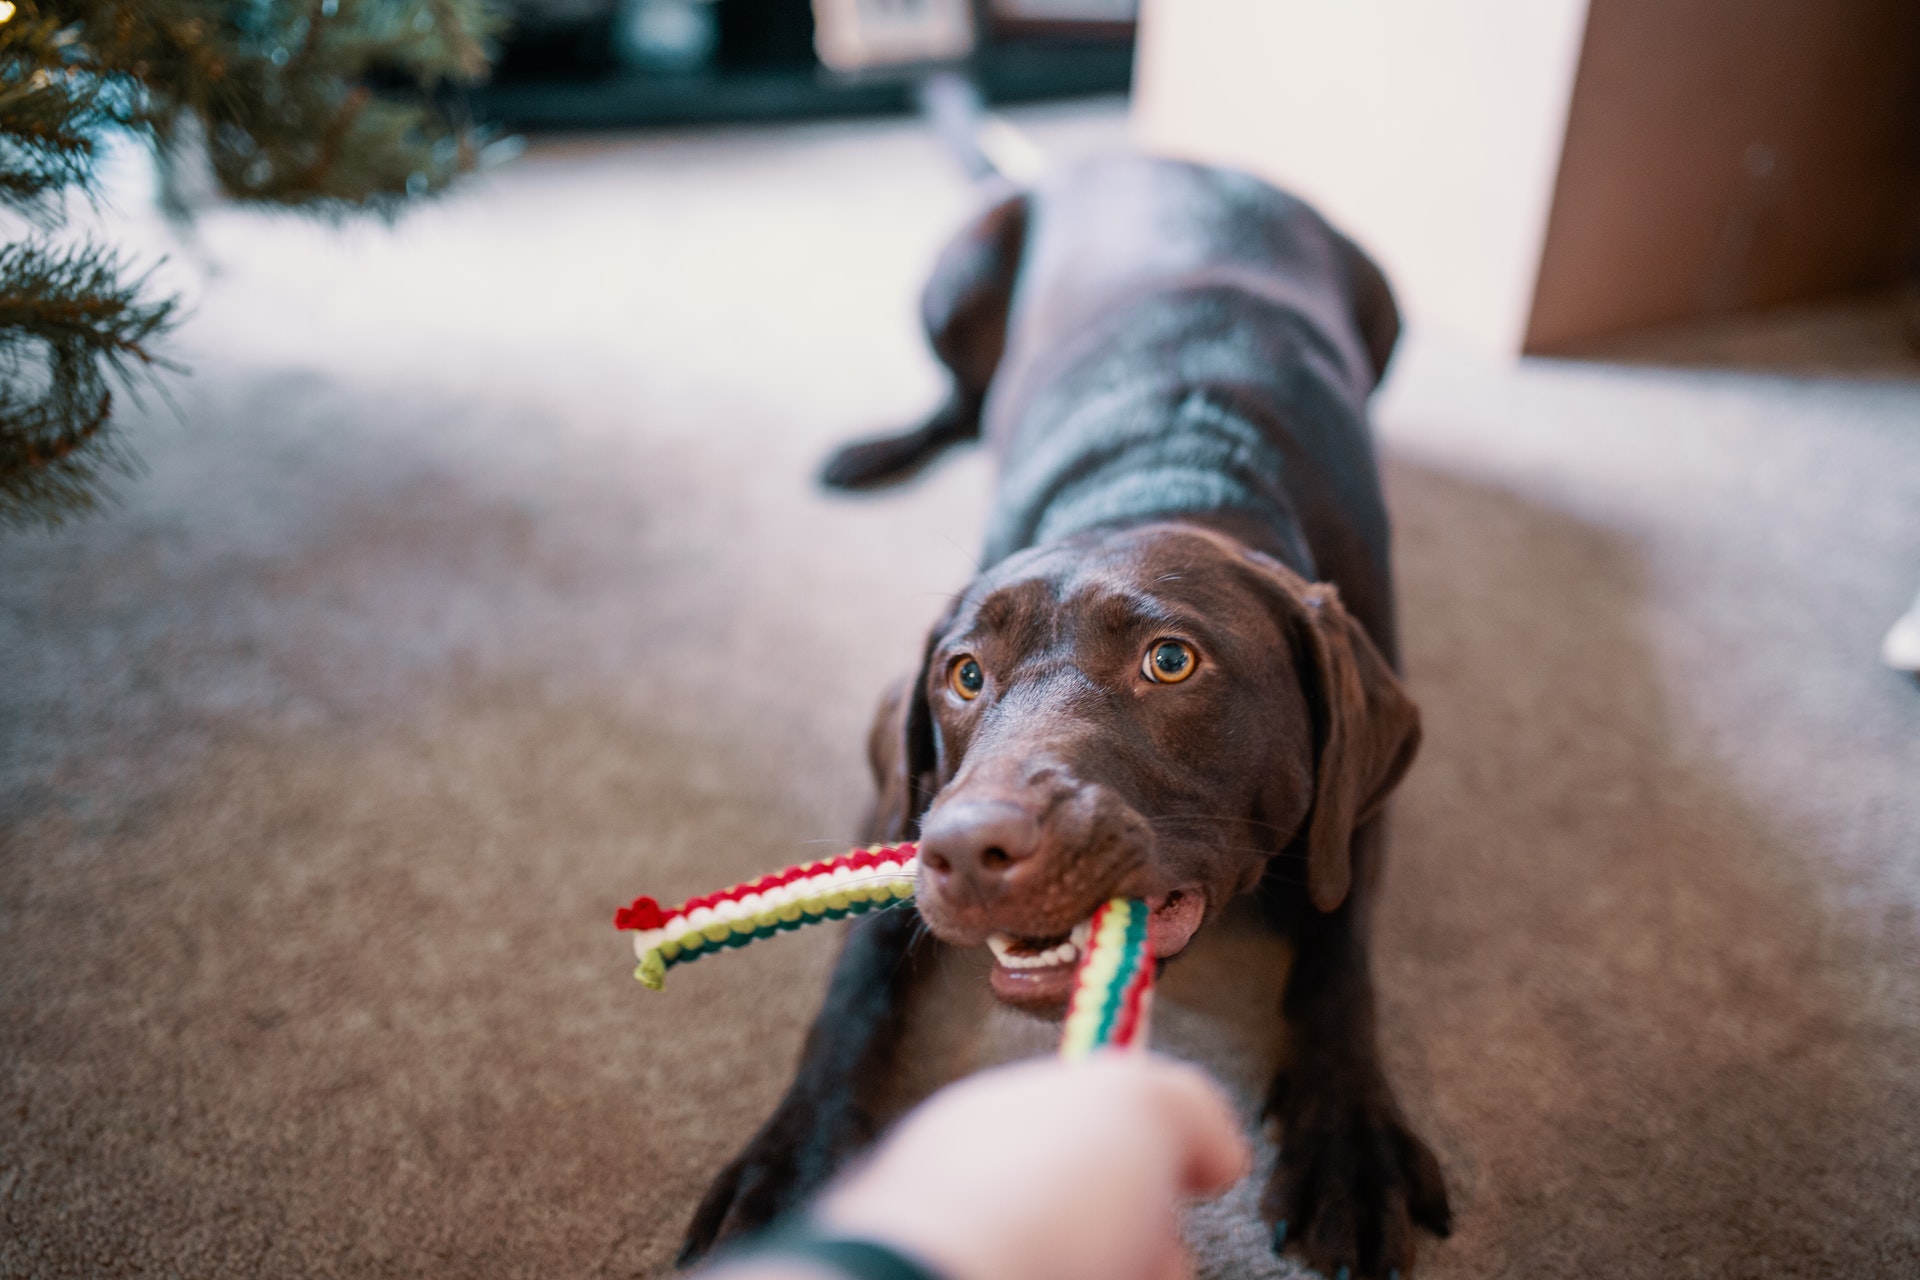 Does Your Dog Like to Shred Toys? Here are the Right Kind of Toys You Should Get